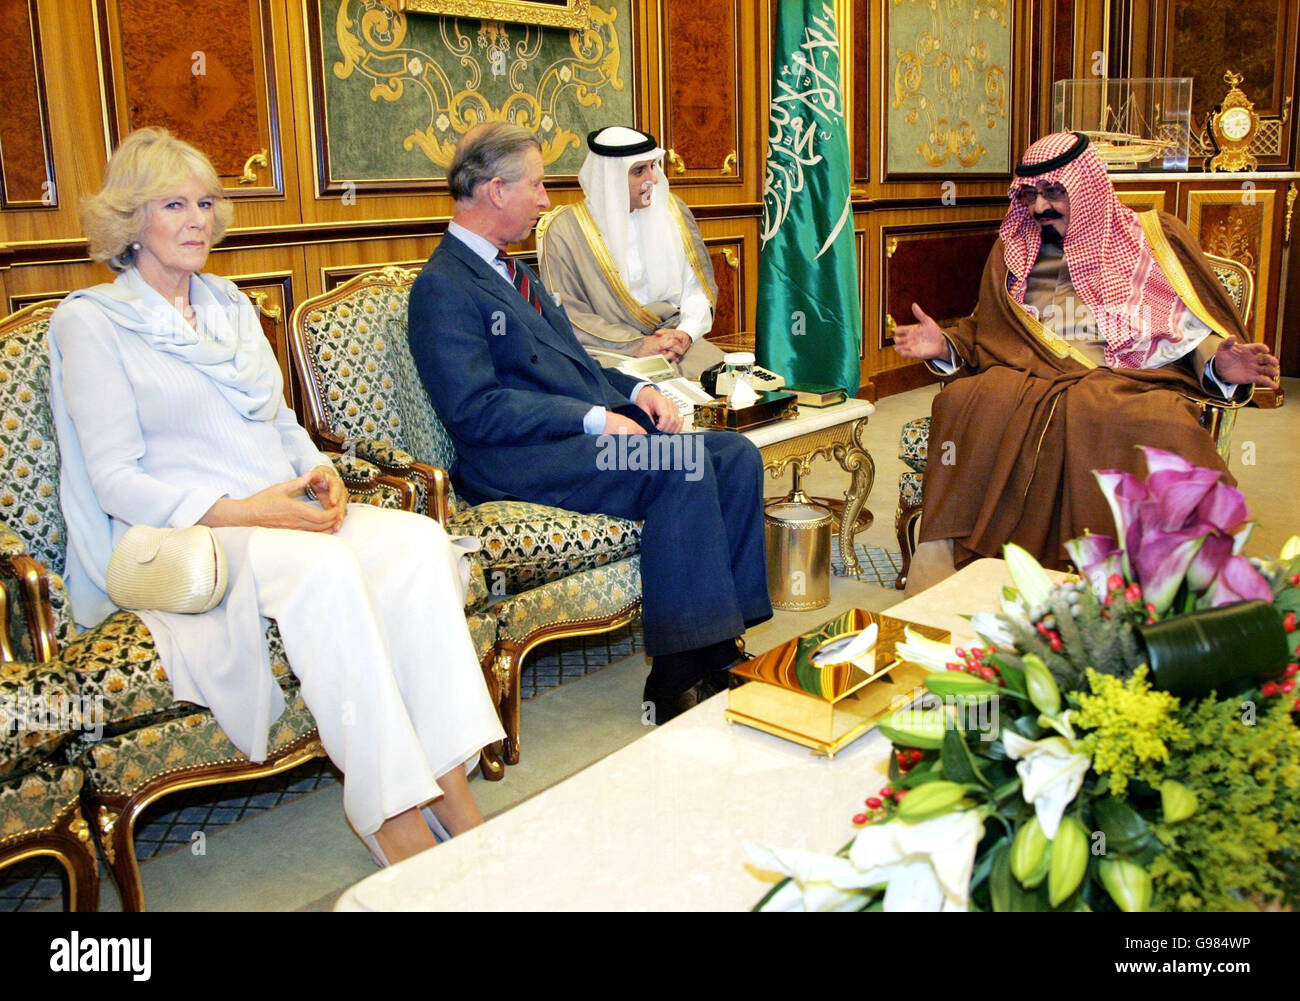 The Prince of Wales talks to King Abdullah Bin Abdulaziz, with the Duchess of Cornwall at his side, Riyadh, Saudi Arabia, Saturday March 25, 2006. Prince Charles and Camilla are spending two days in Riyadh amid intense security as they continue with their second overseas tour. See PA story ROYAL Charles. PRESS ASSOCIATION photo. Photo credit should read: Ian Jones/Daily Telegraph Pool/PA Stock Photo